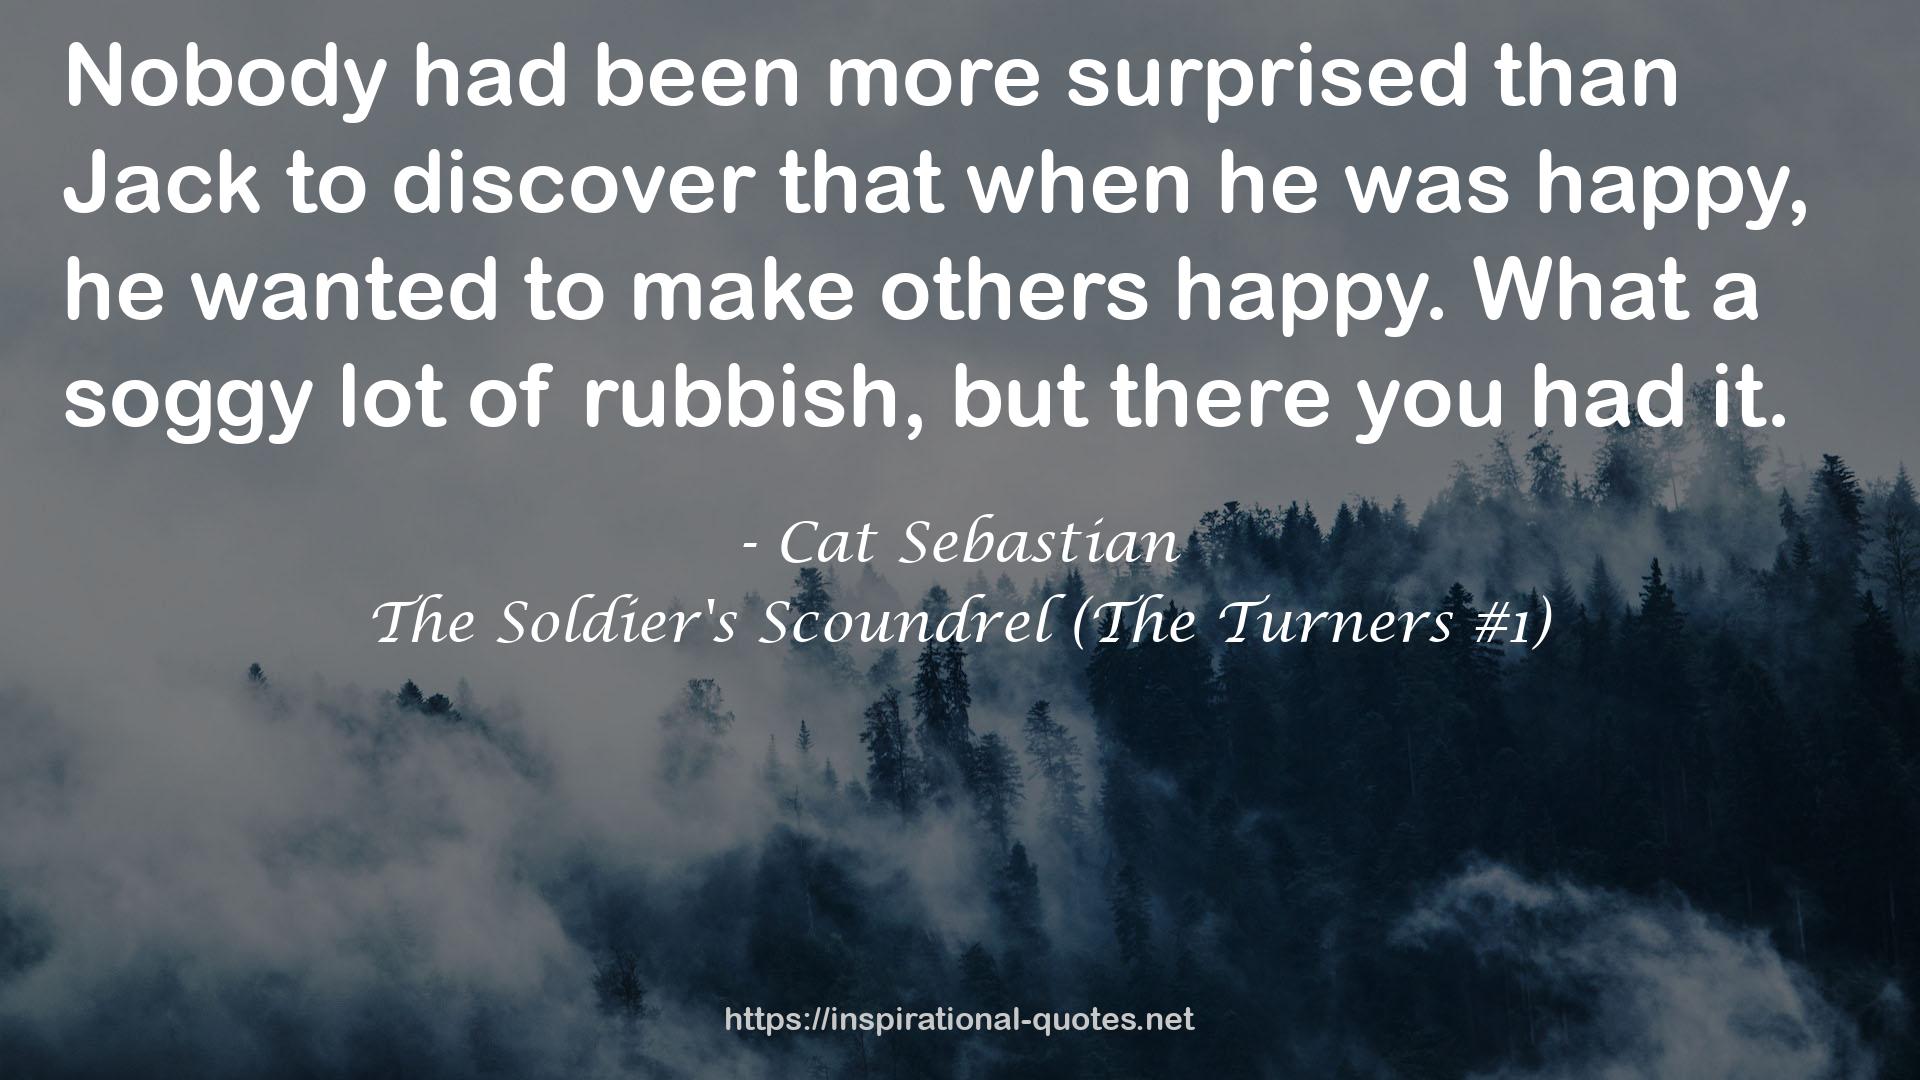 The Soldier's Scoundrel (The Turners #1) QUOTES